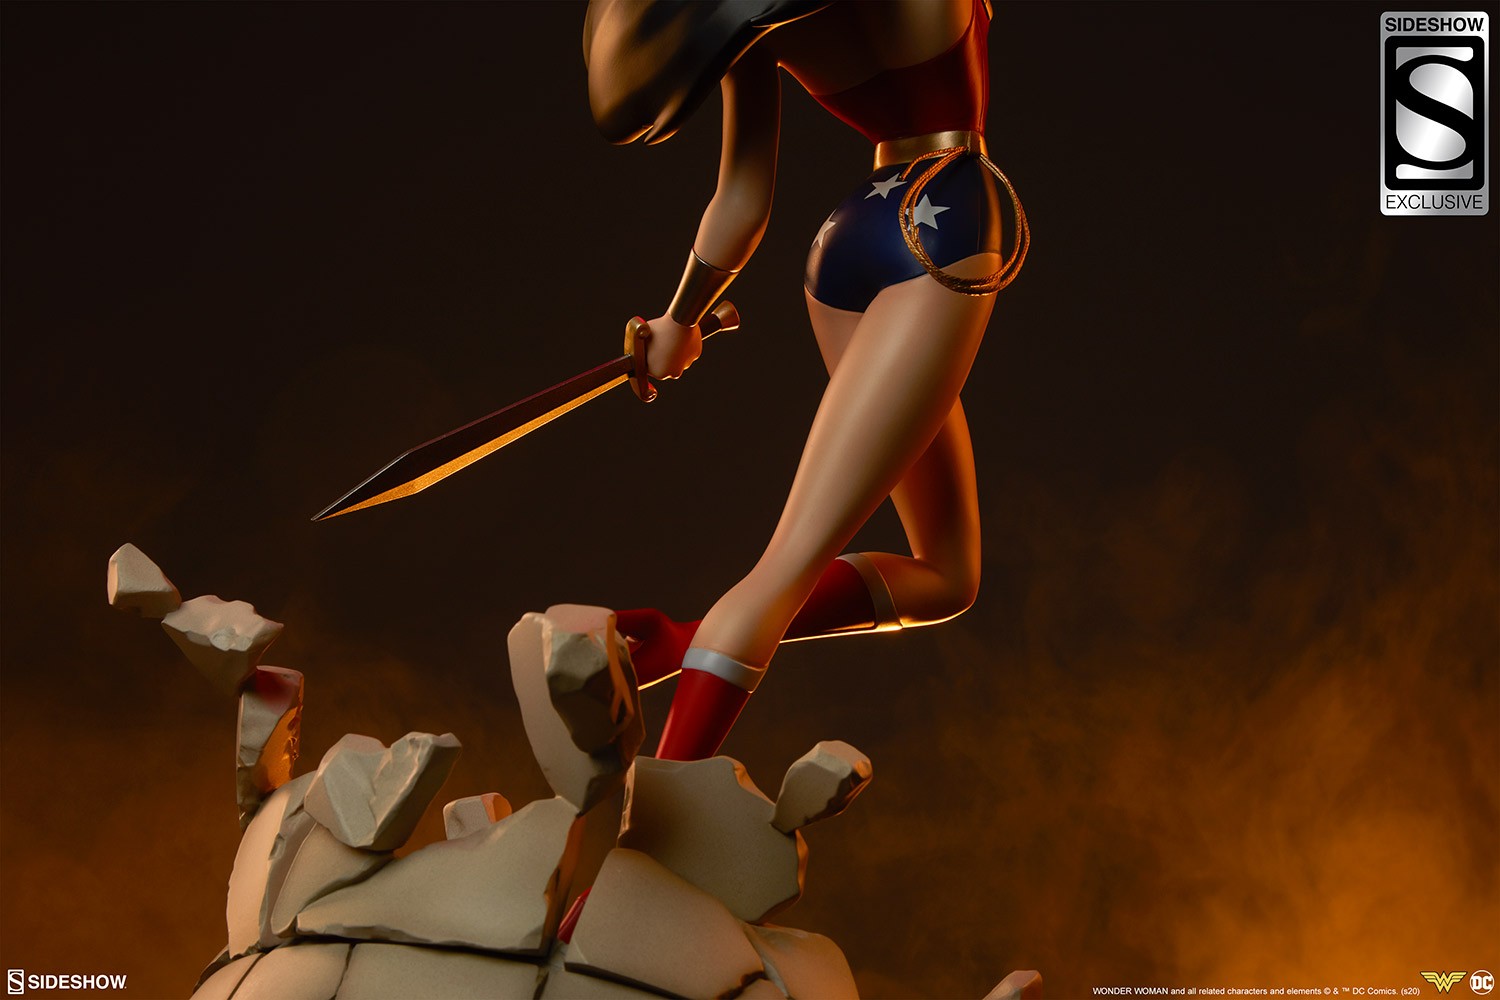 Wonder Woman Exclusive Edition View 6